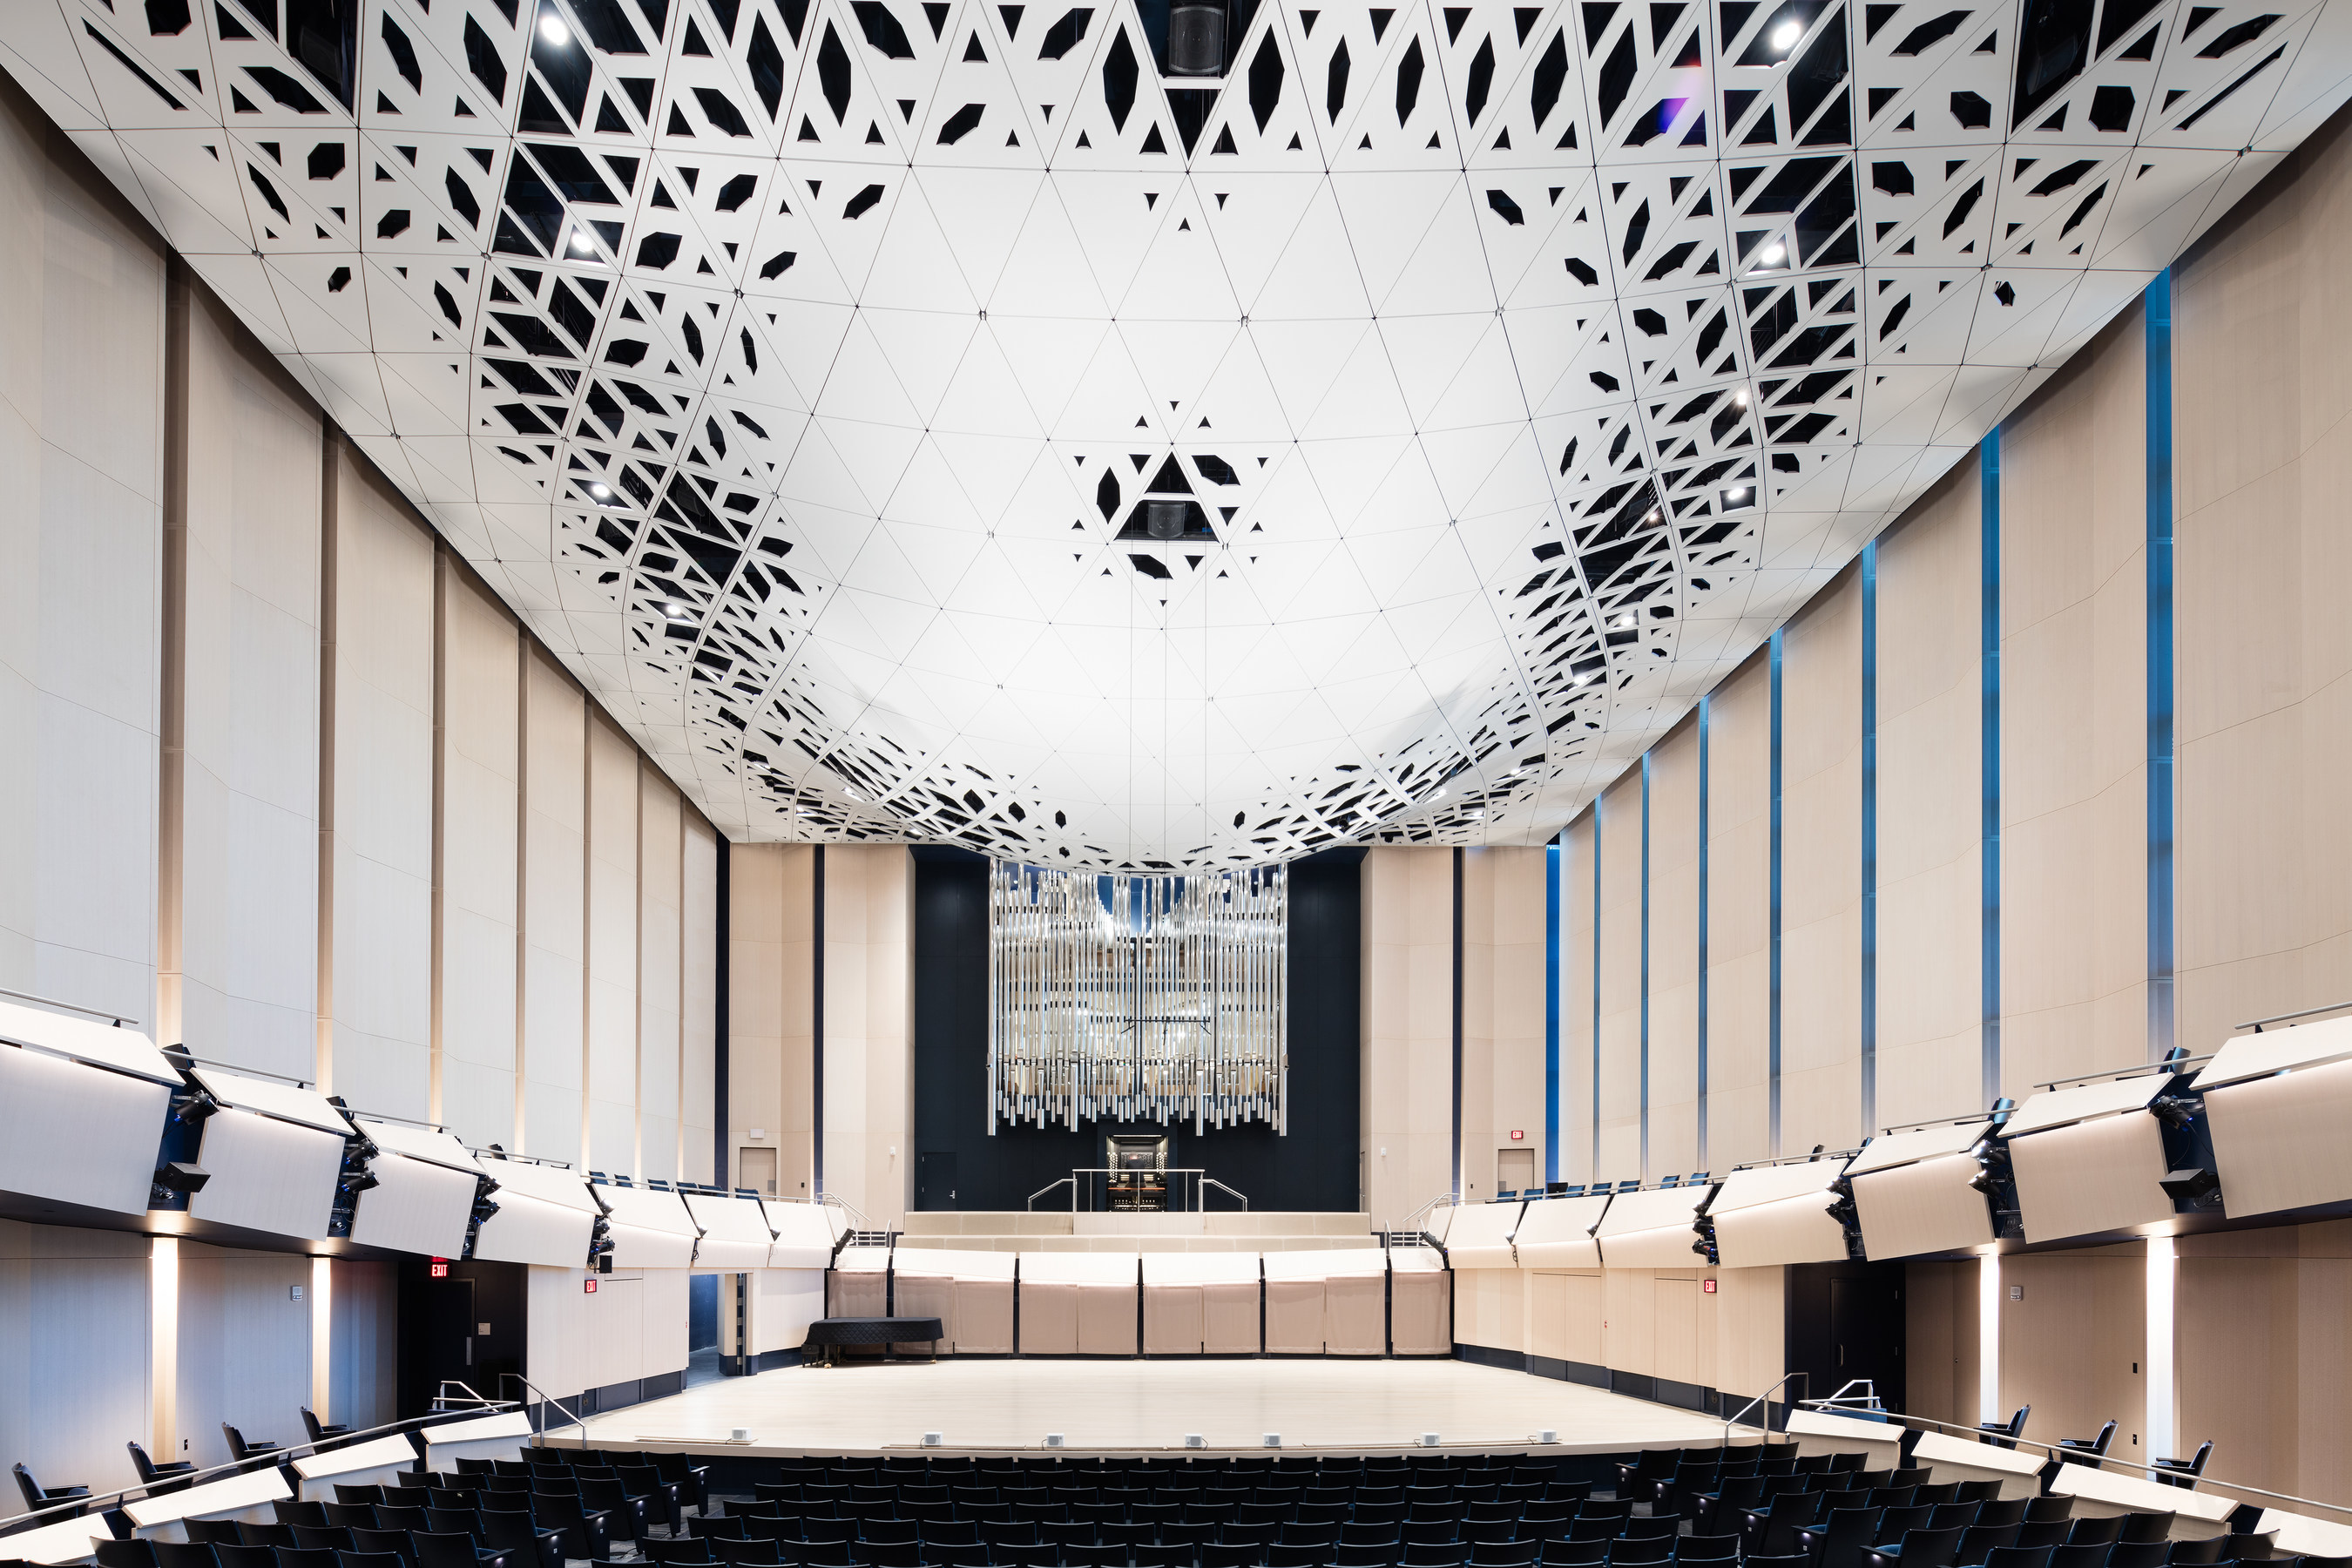 Voxman Music Building, University of Iowa. The 700-seat performance hall features a "theatroacoustic" ceiling system devised to unify acoustics, lighting, and life-safety requirements into a single dramatic, multi-functional architectural expression. The resulting intricately sculpted element is assembled out of 946 unique, folded-aluminum composite modules. Image courtesy LMN Architects.